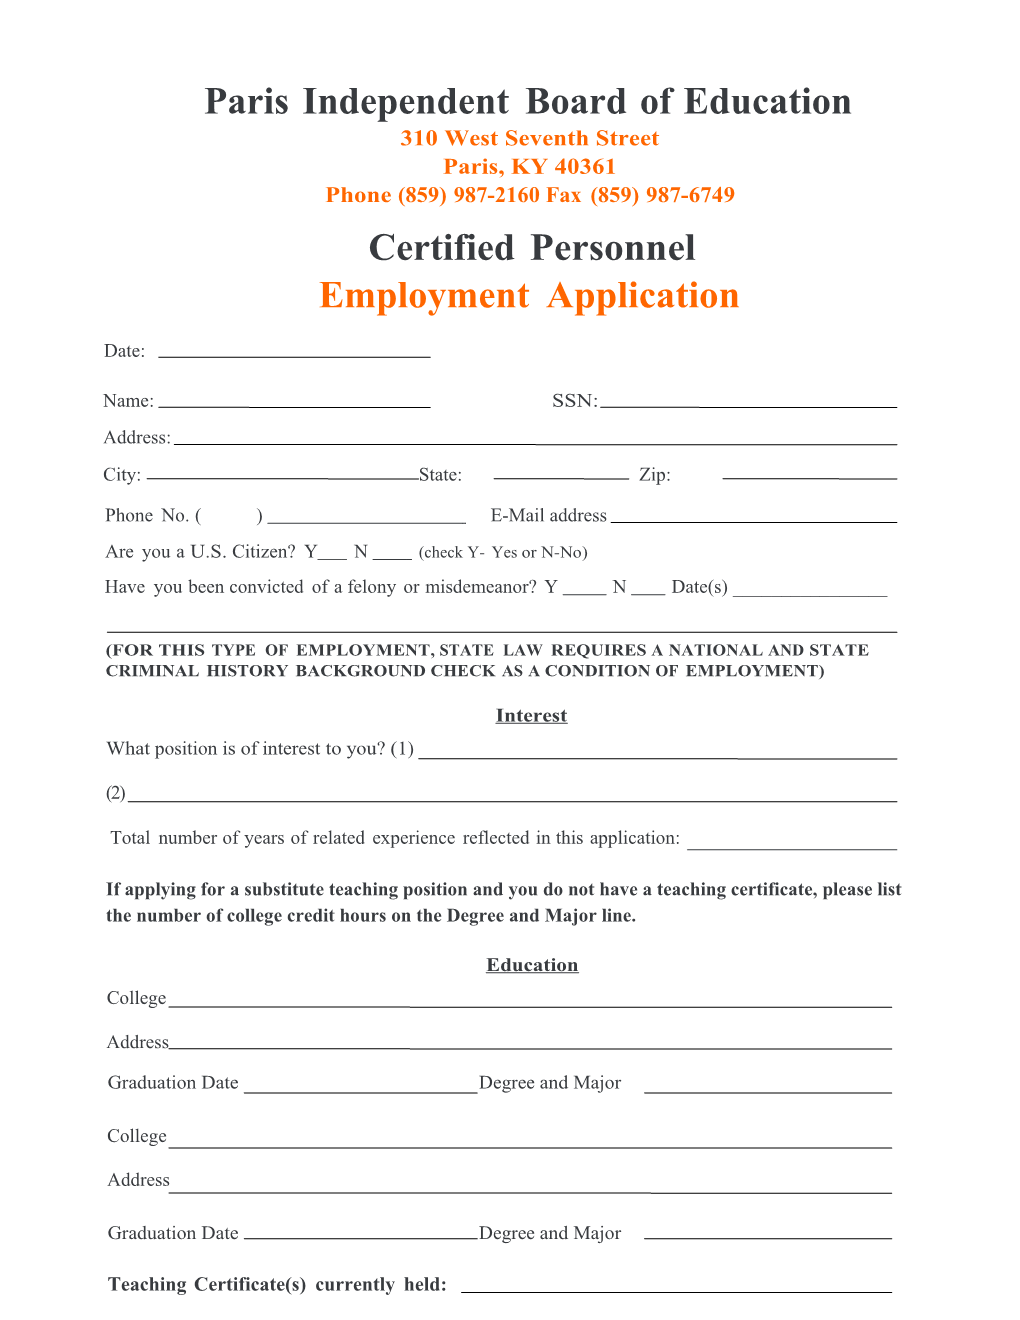 Certified Personnel Employment Application.Pdf